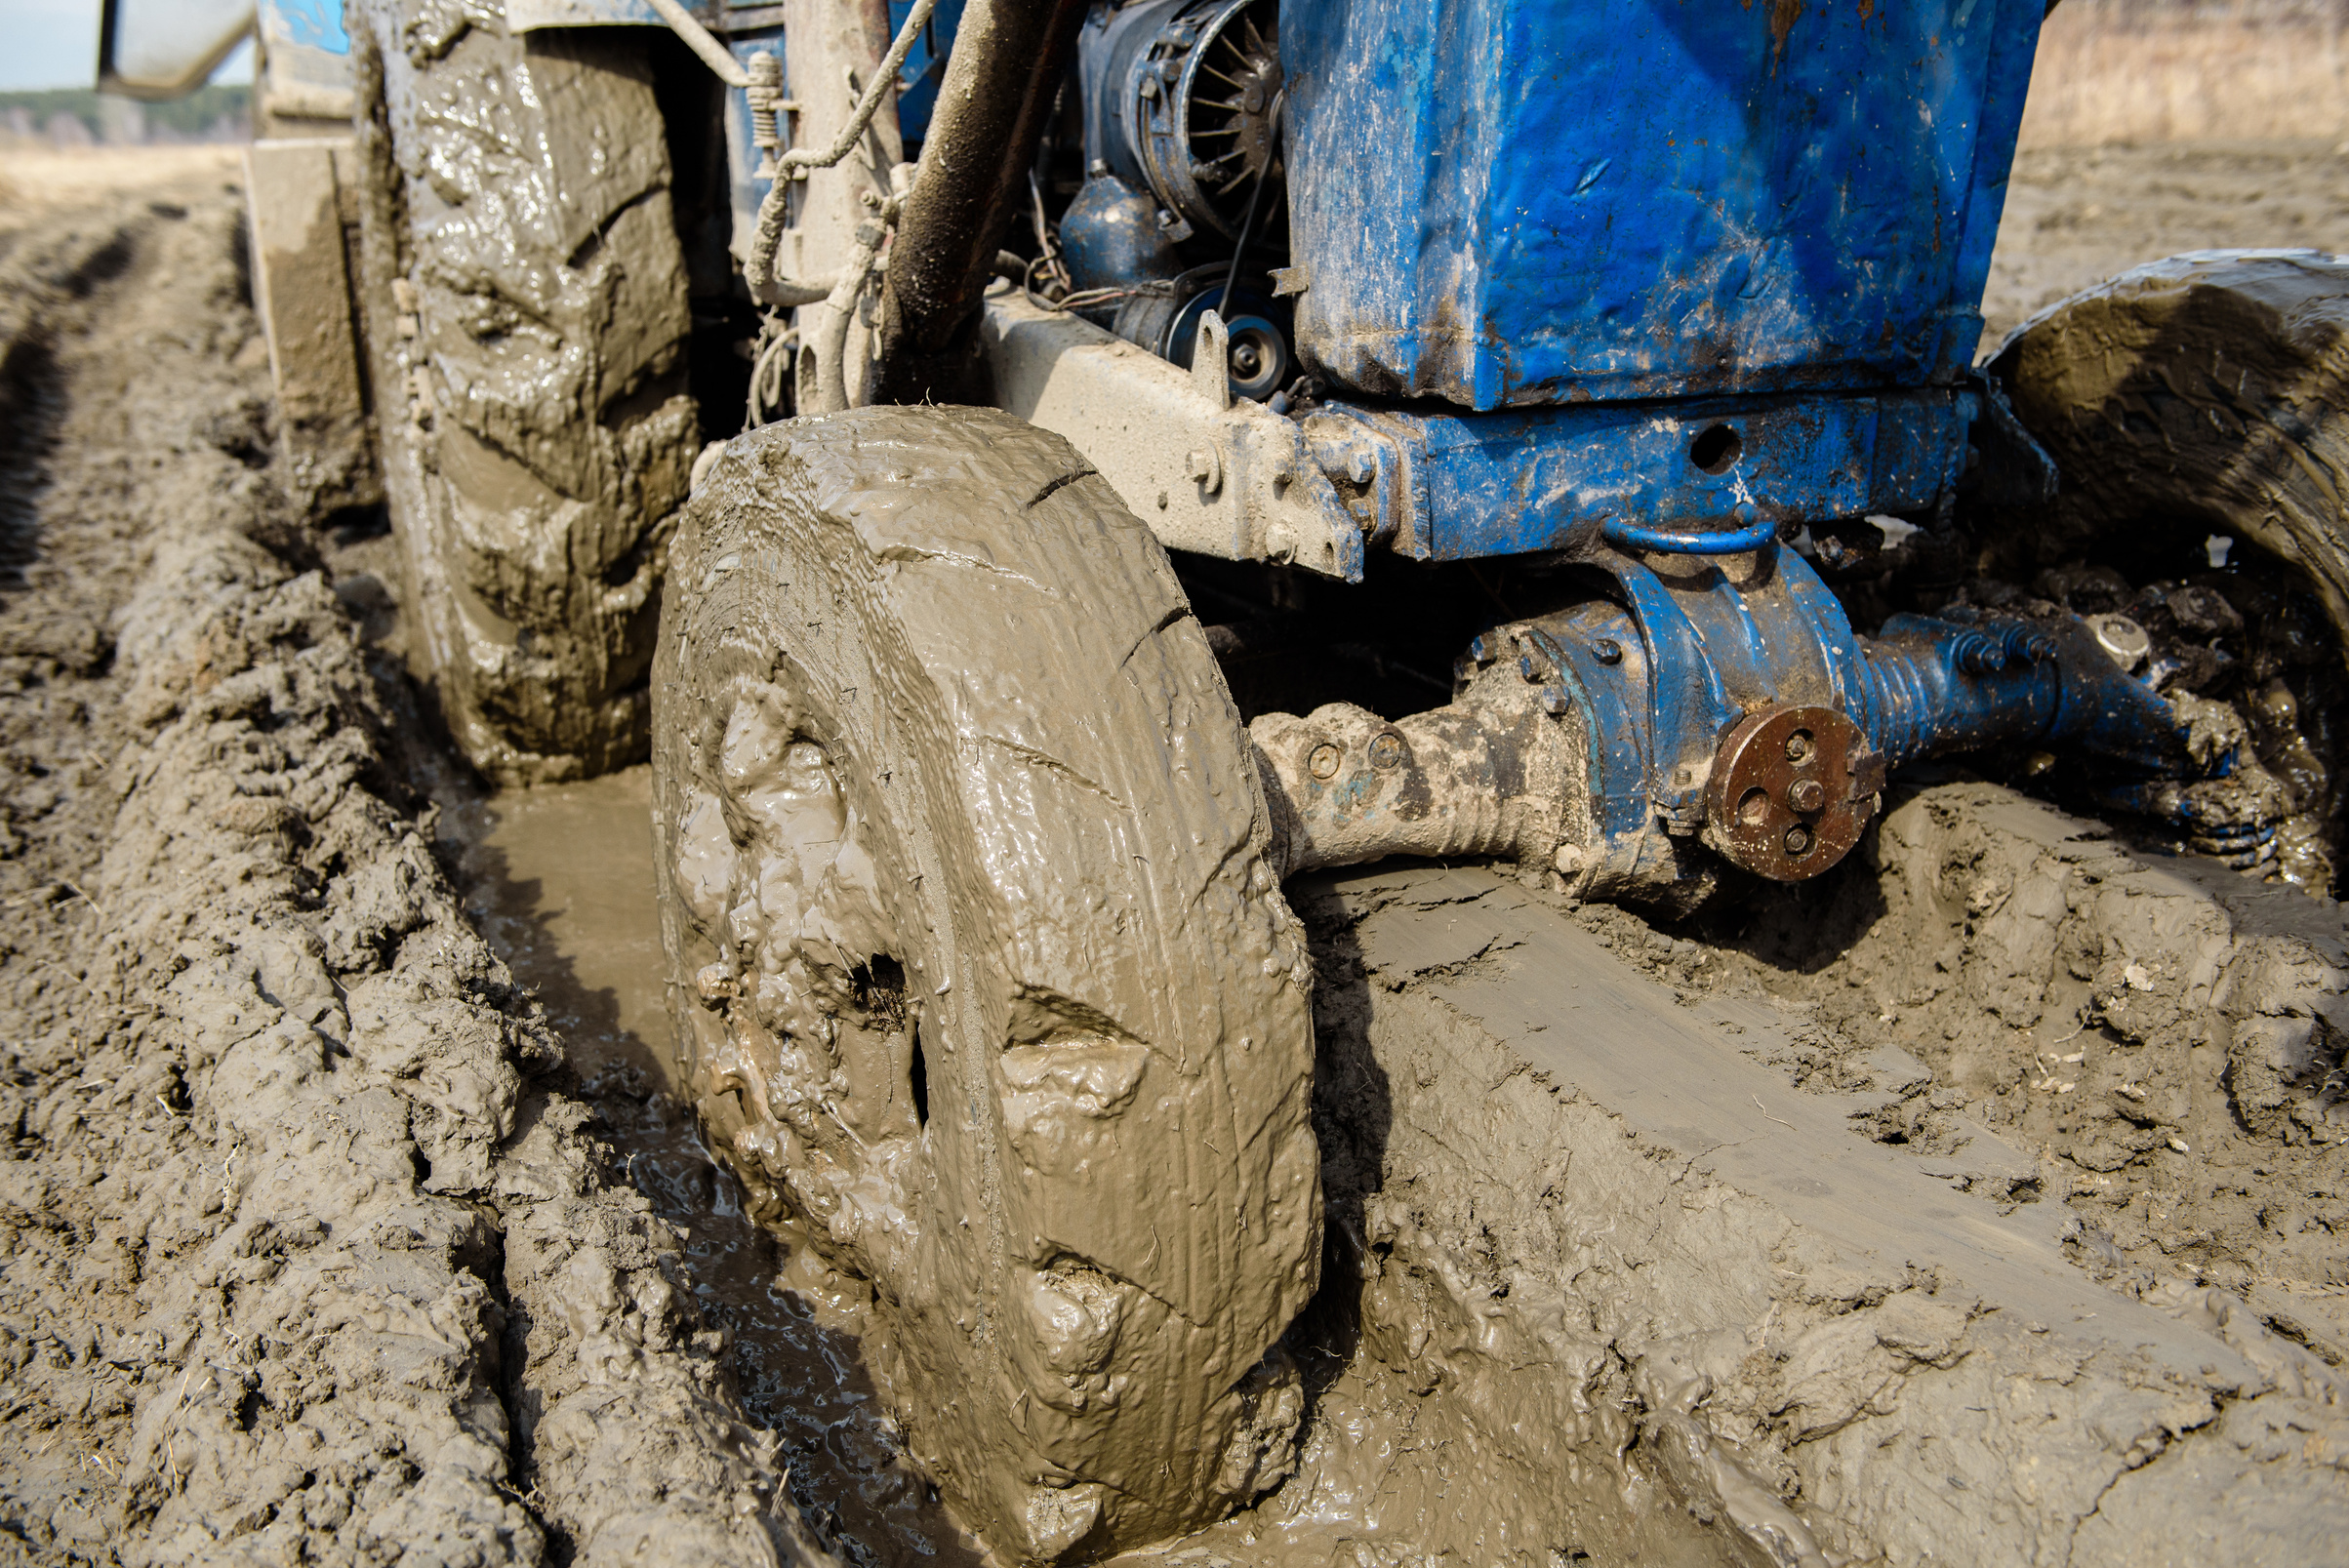 Tractor stuck in the mud.